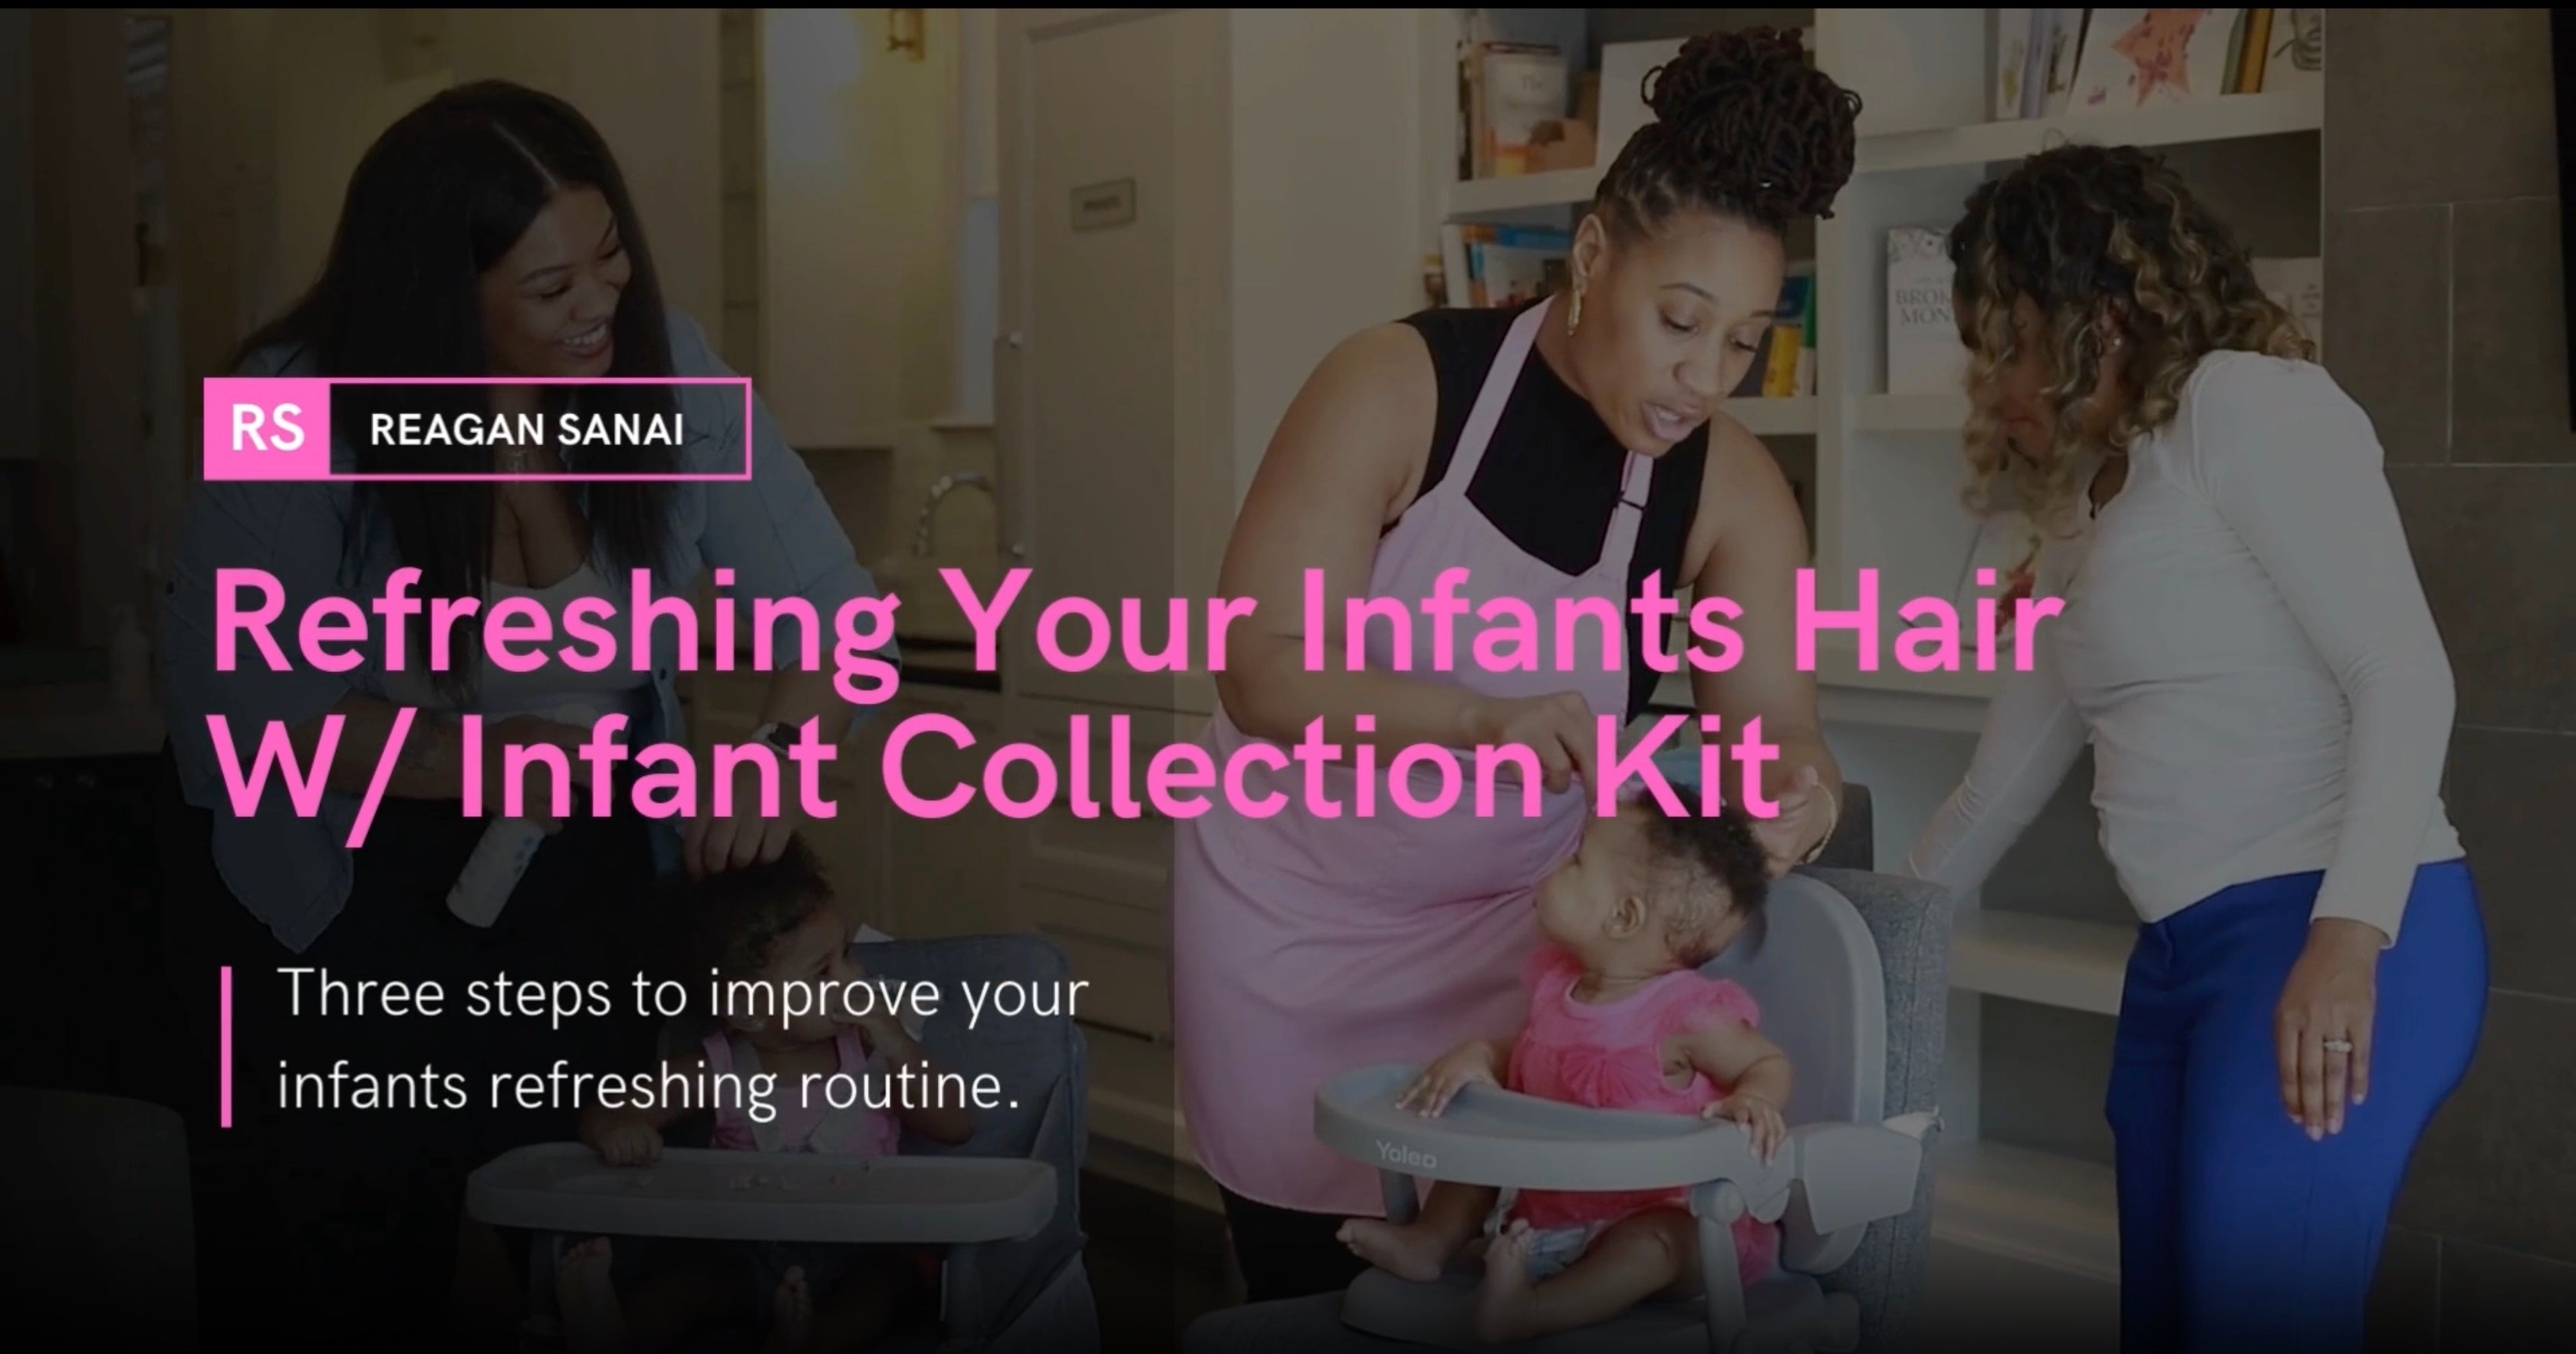 Load video: Reagan Sanai Essentials Infant Collection Kit Video